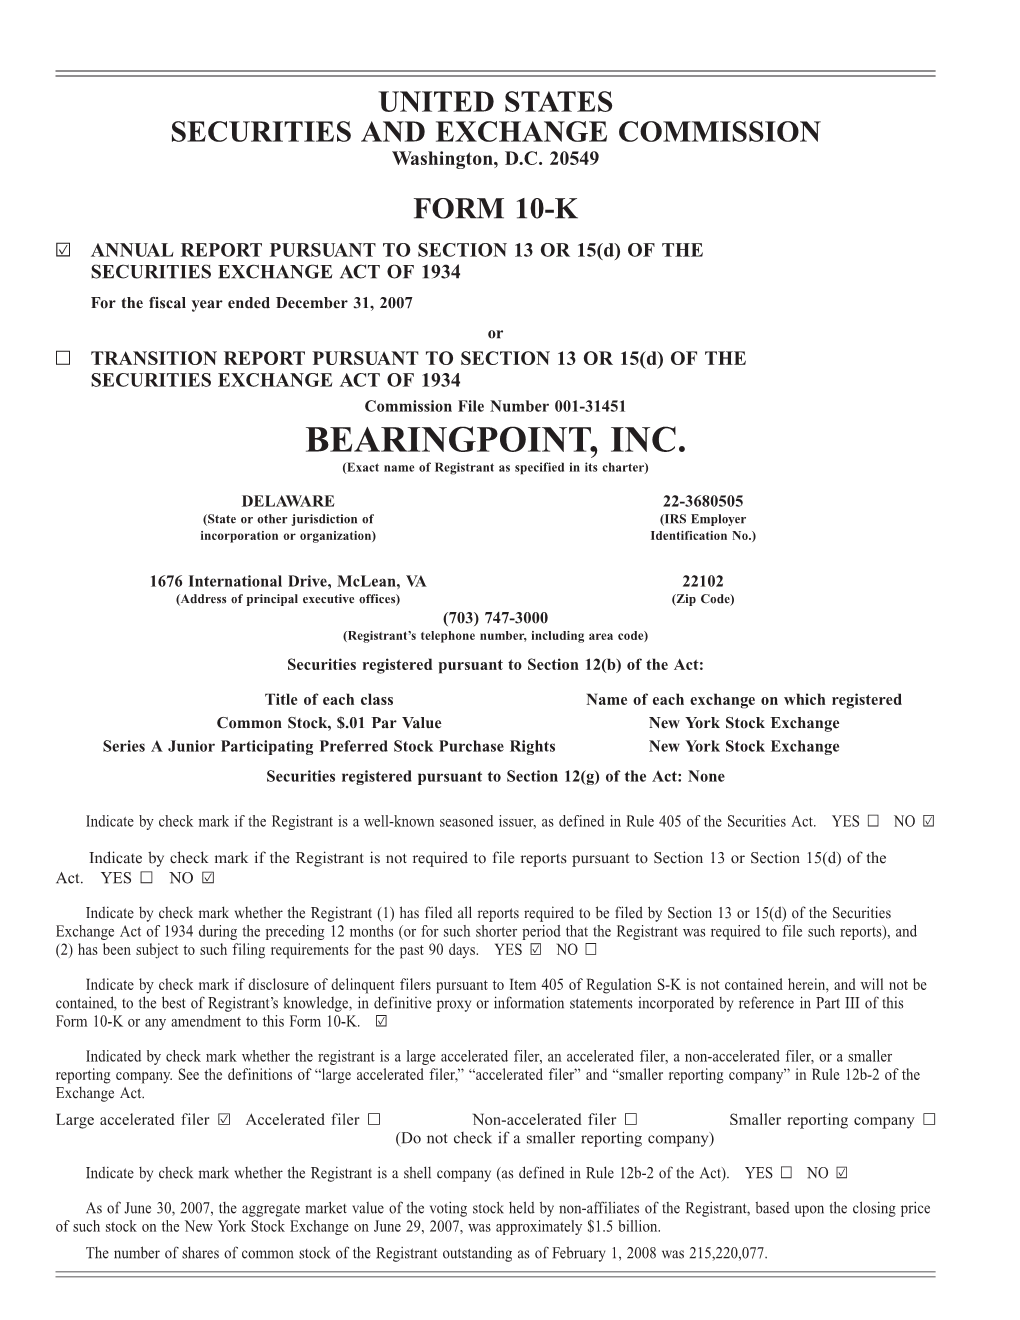 BEARINGPOINT, INC. (Exact Name of Registrant As Specified in Its Charter)